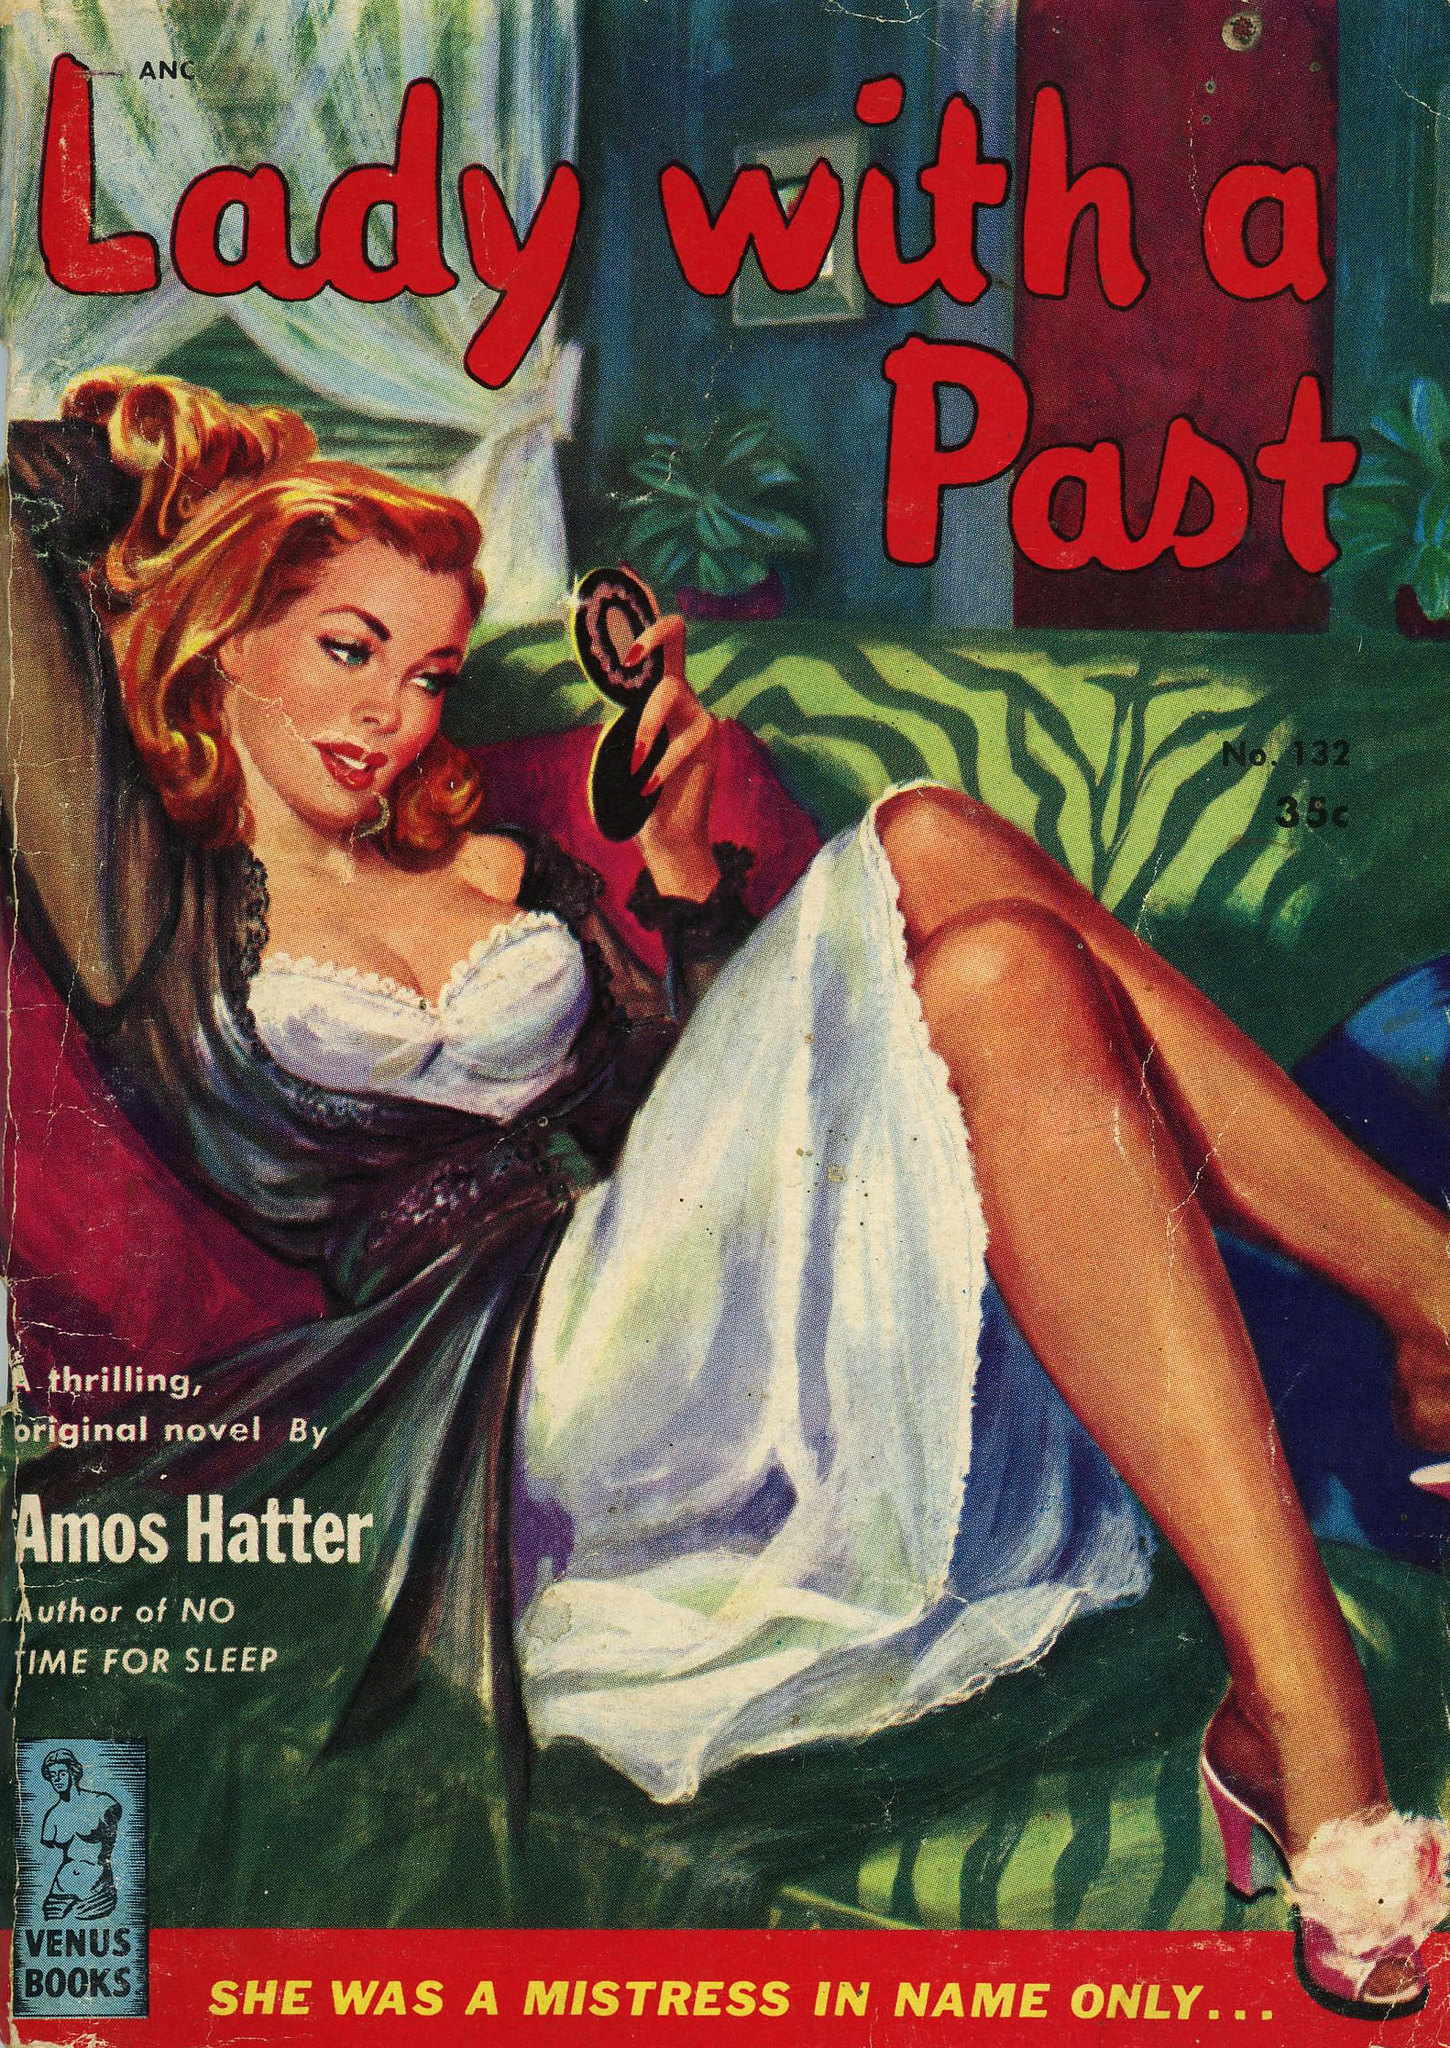 5618478646-venus-books-132-amos-hatter-lady-with-a-past